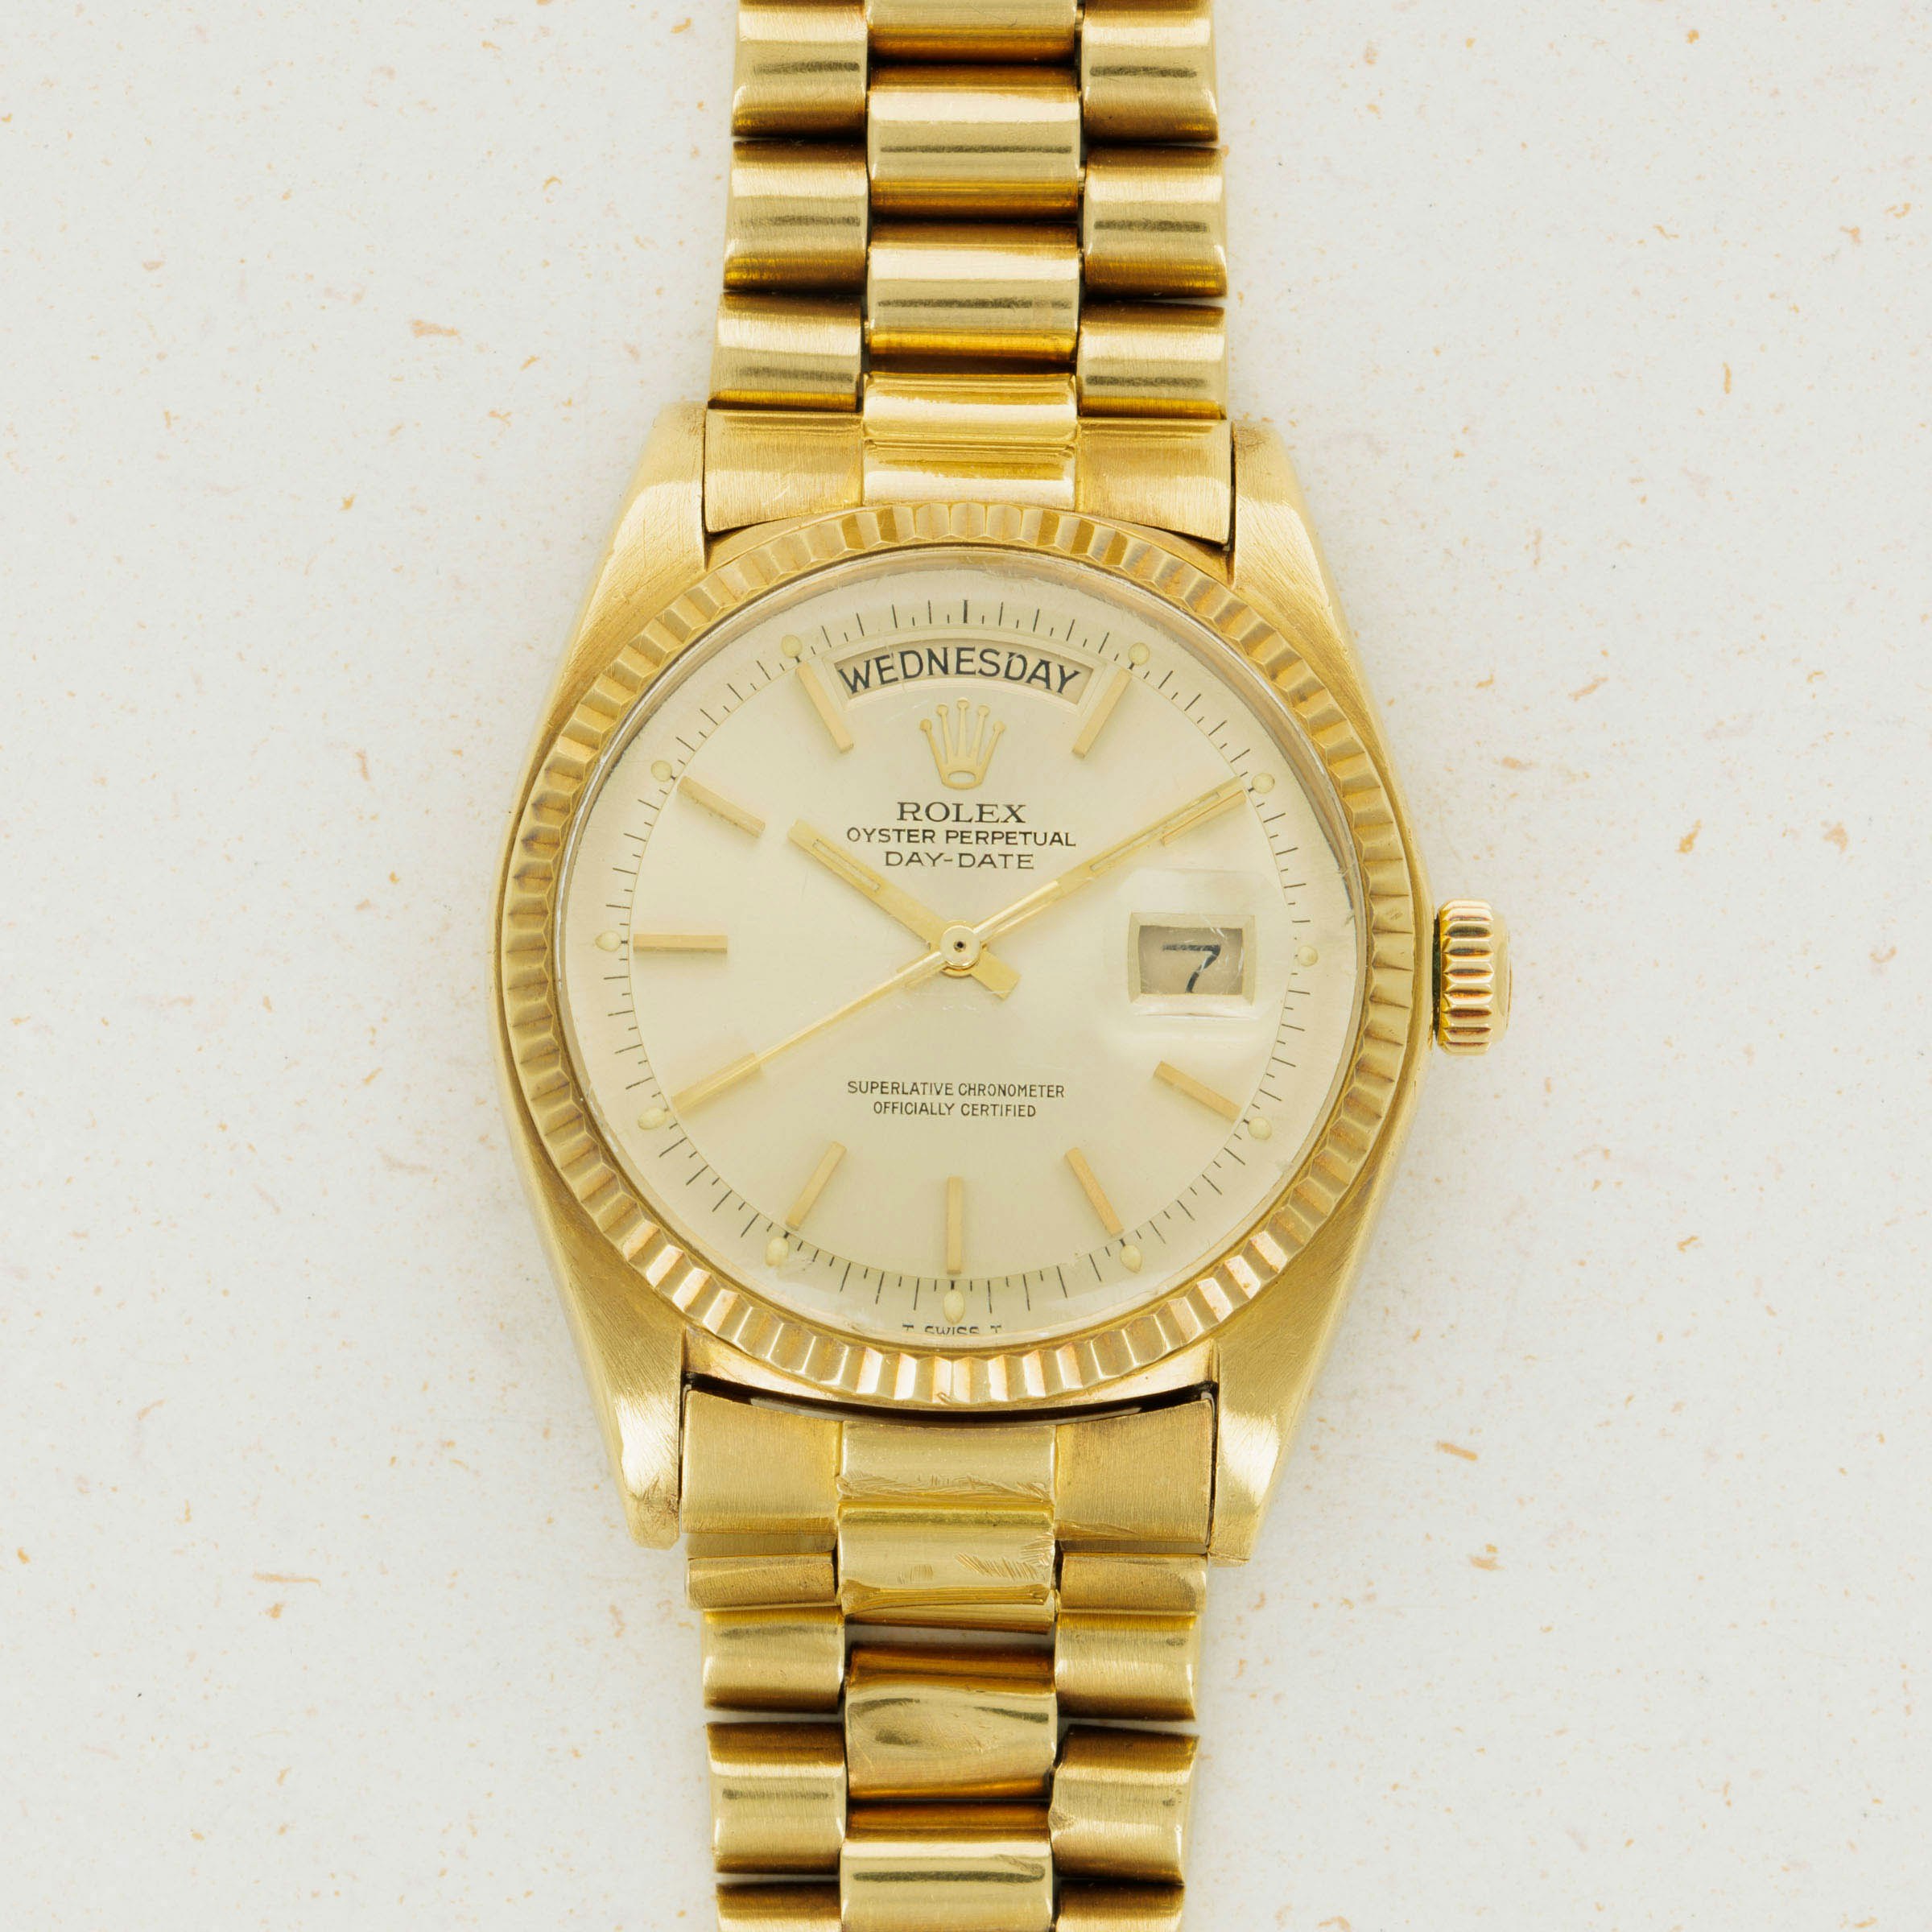 Thumbnail for Rolex Day-Date 1803 Champagne Dial 18 YG with Guarantee